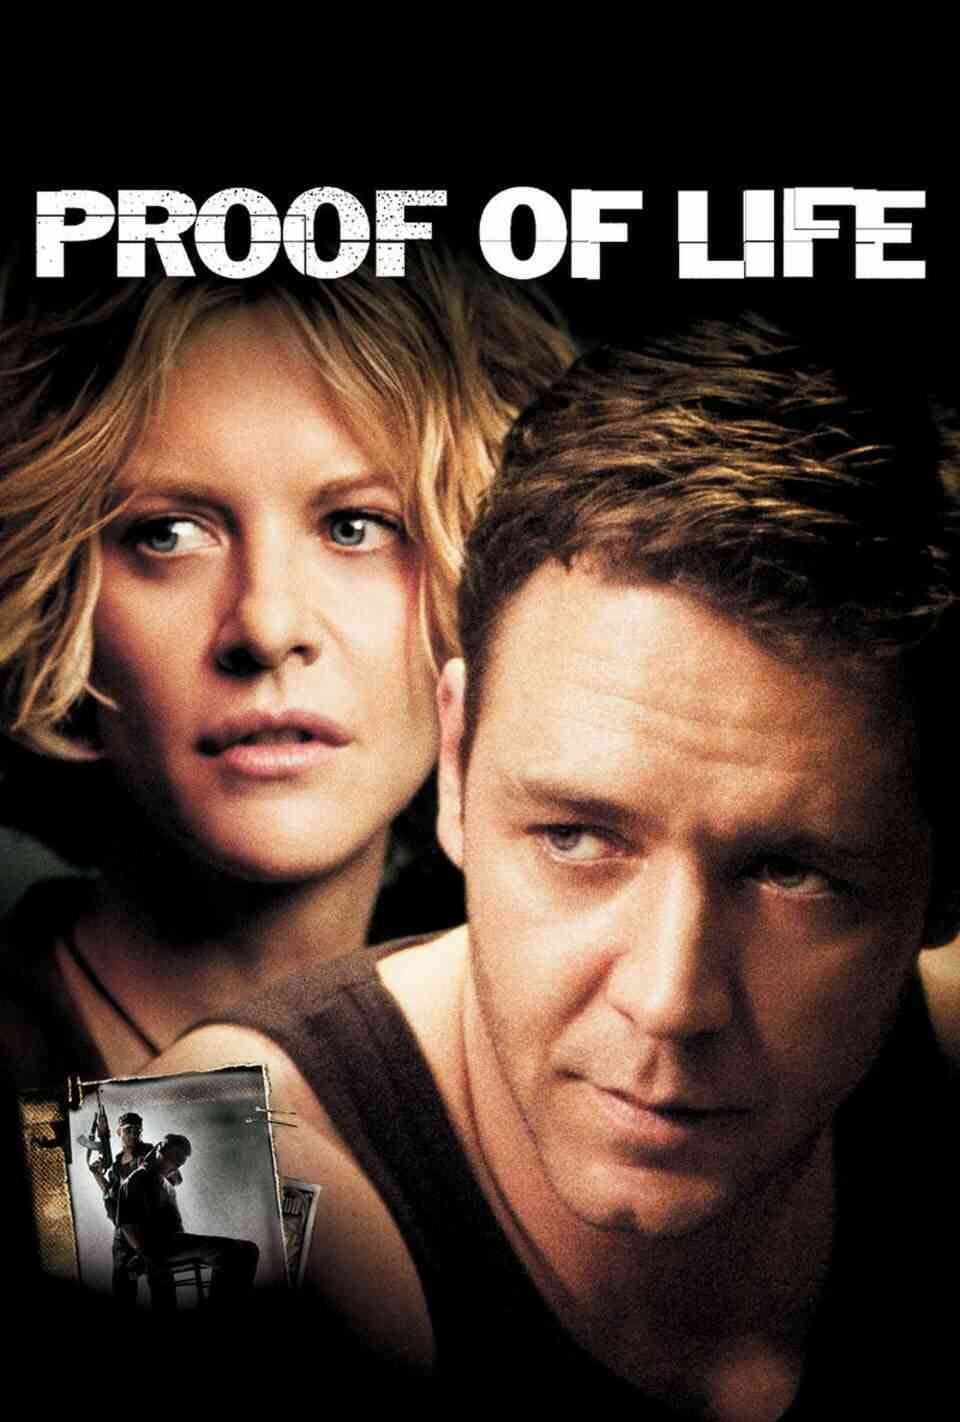 Read Proof of Life screenplay (poster)